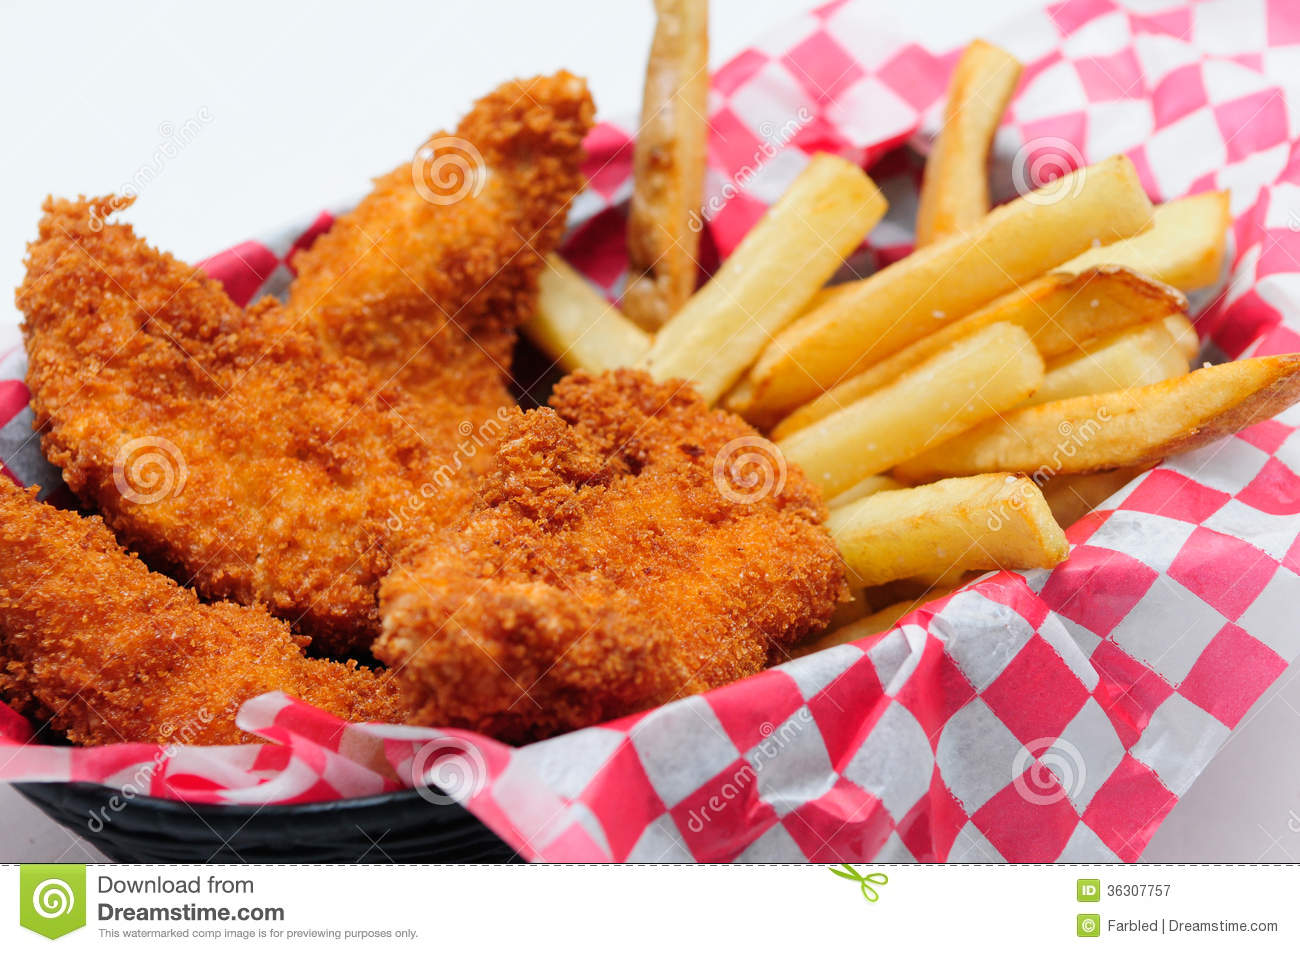 Breaded Chicken Strips With French Fries And Dipping Sauce In A Diner